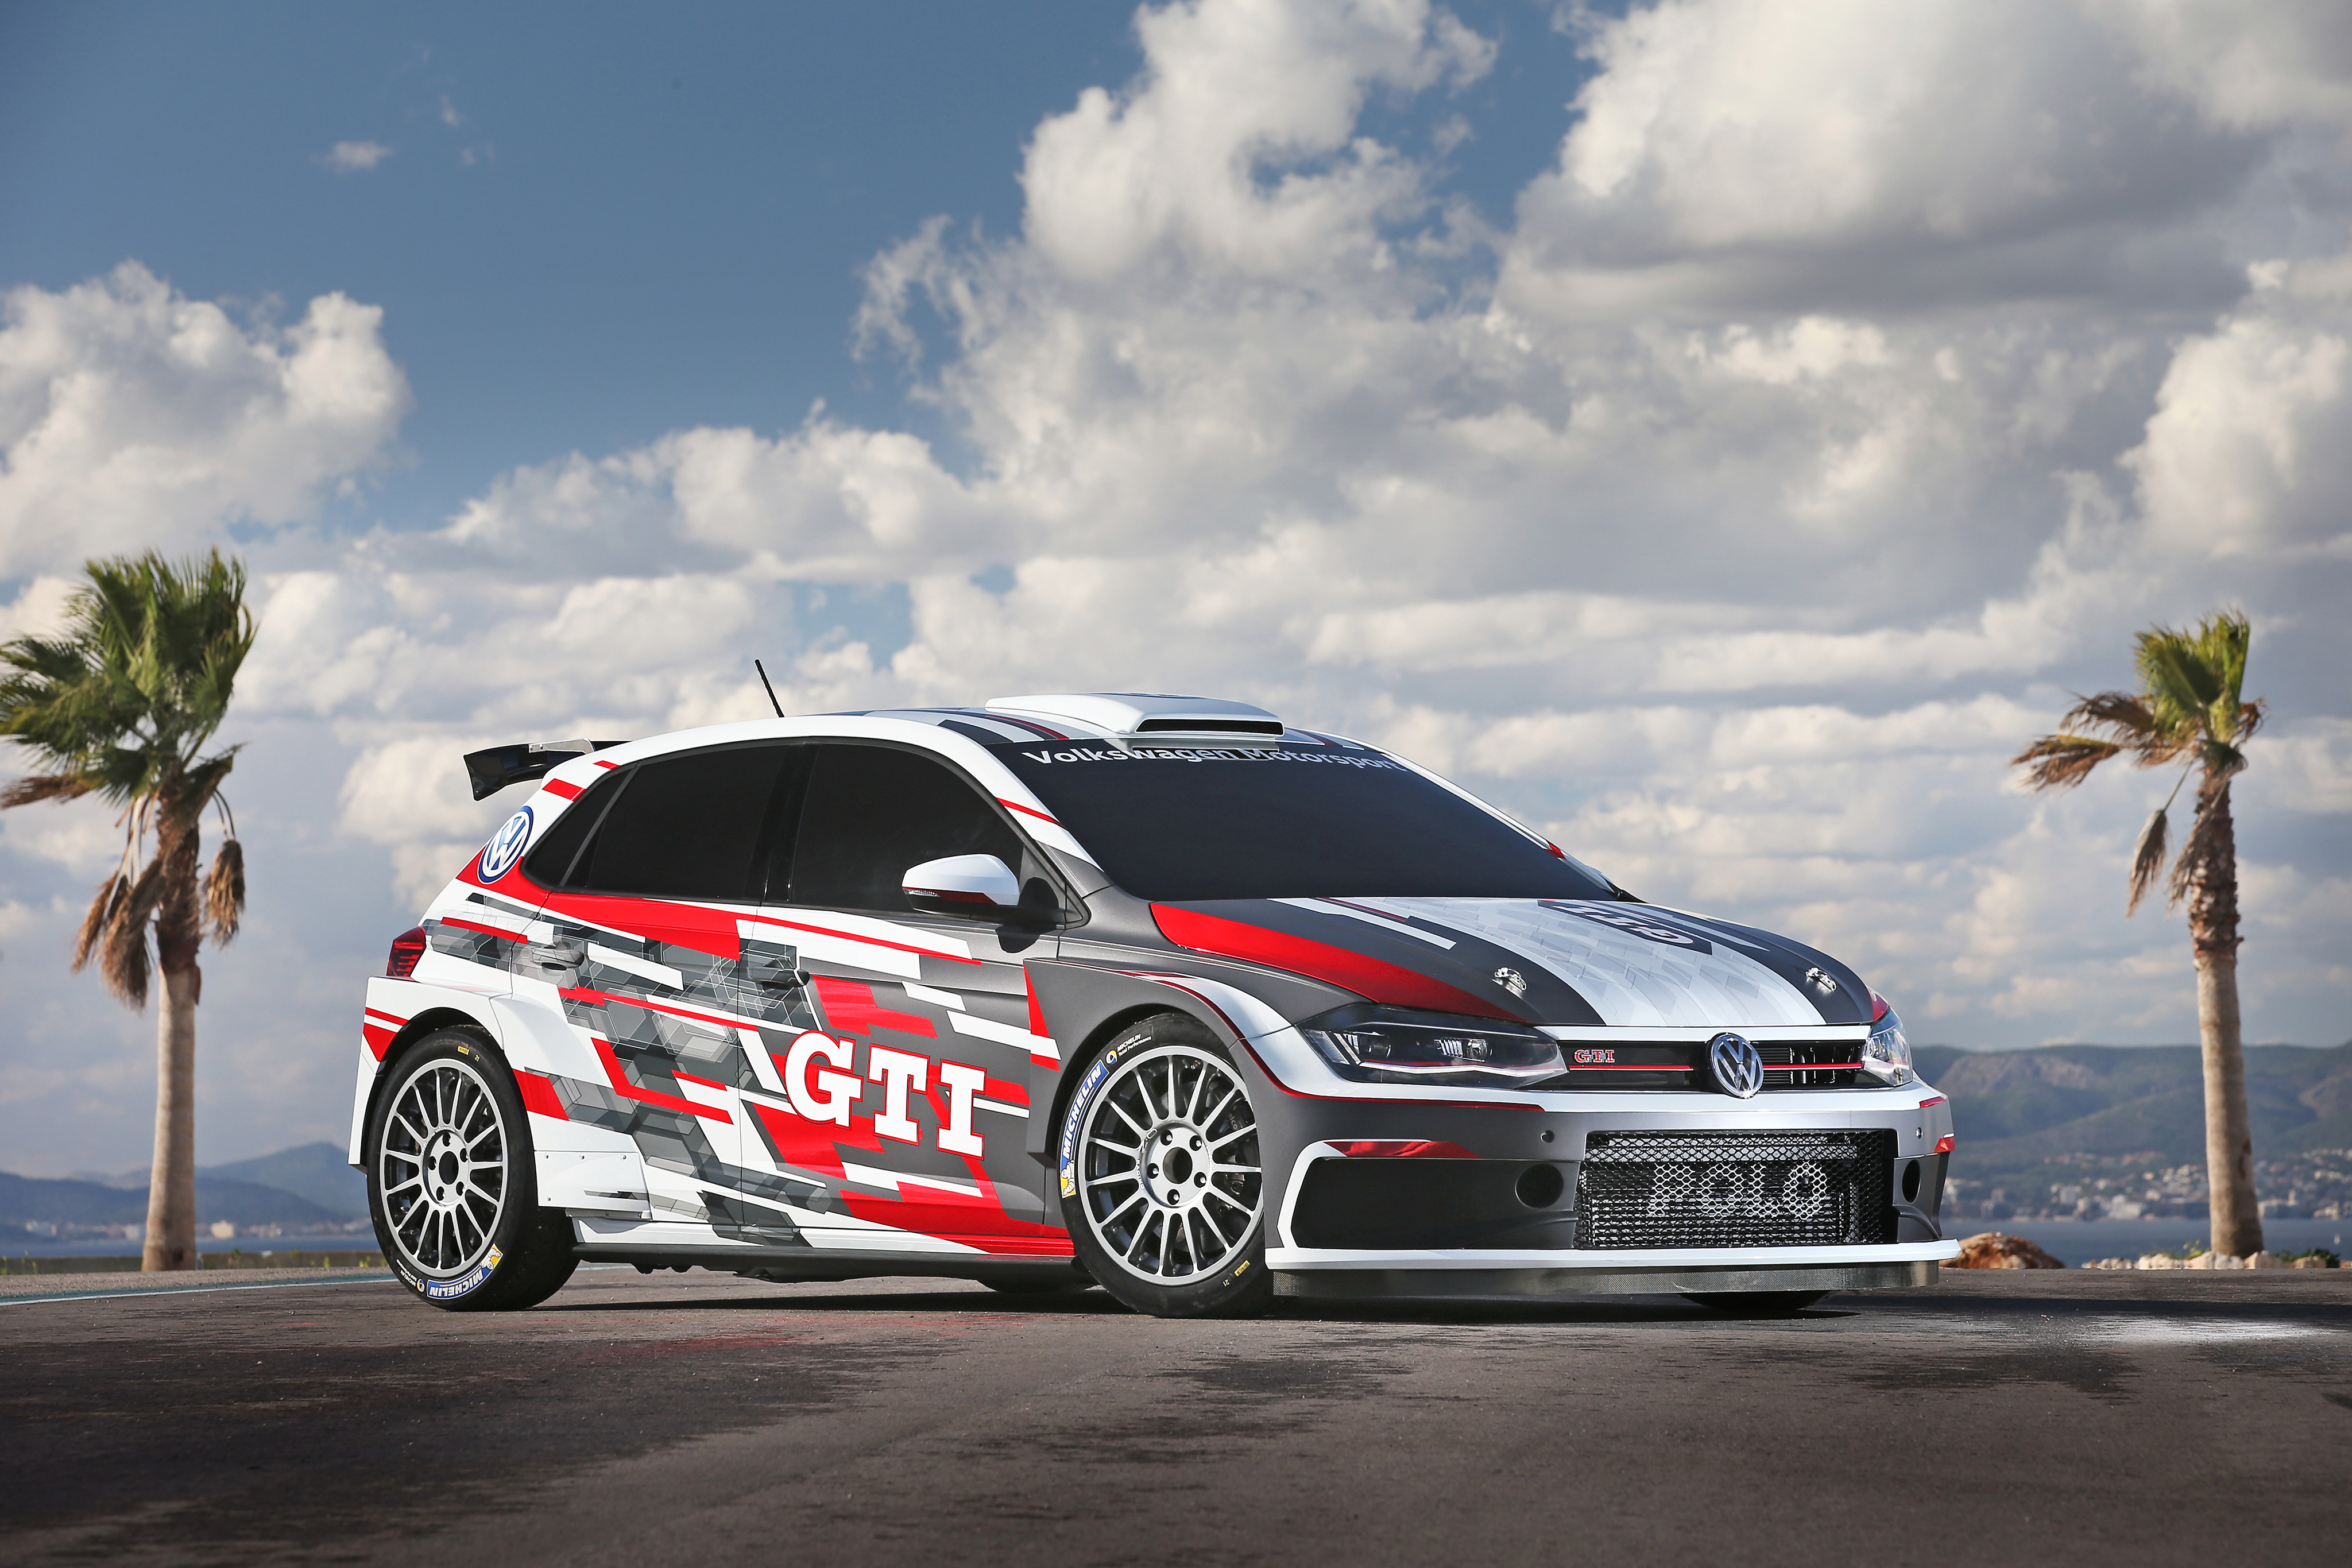 Volkswagen polo gti r k hd cars k wallpapers images backgrounds photos and pictures